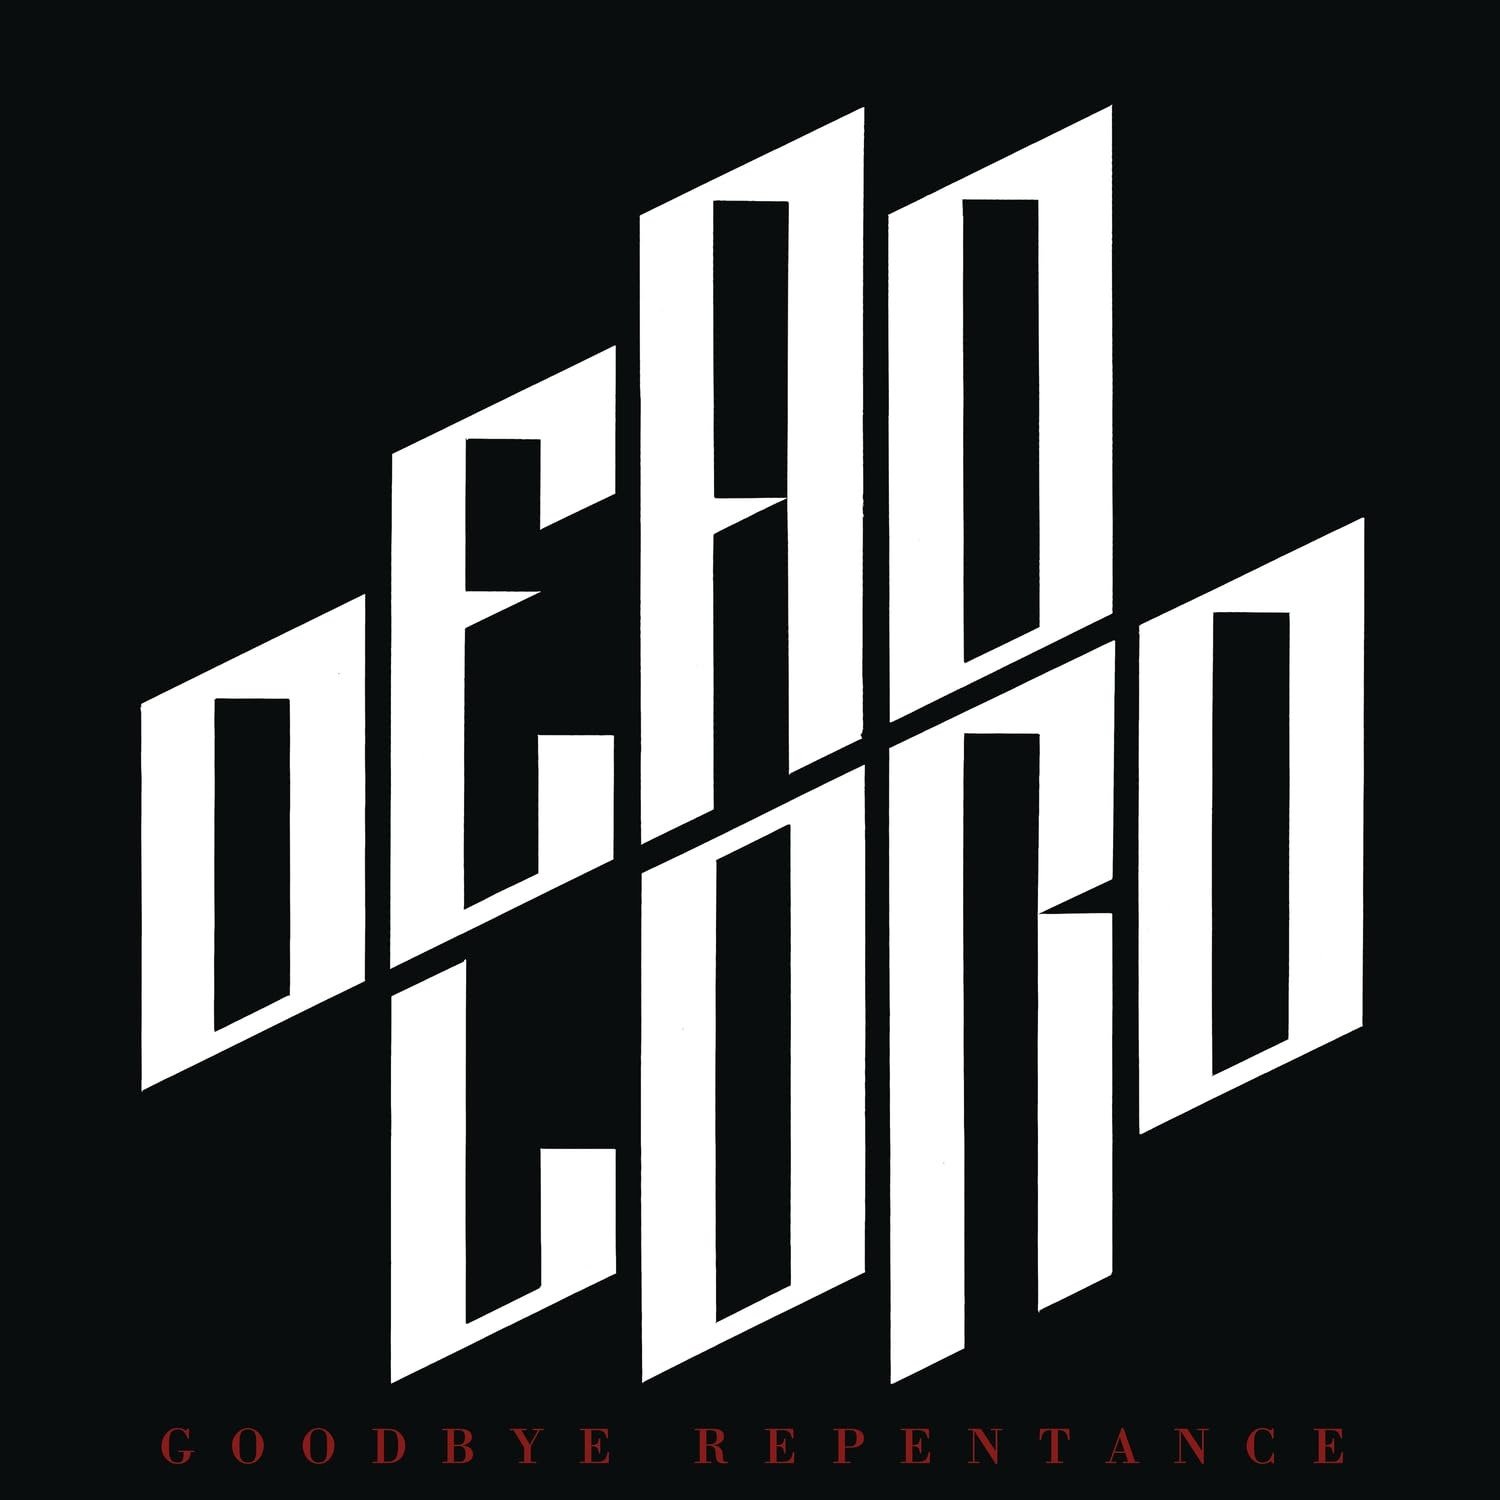 Goodbye Repentance | Dead Lord